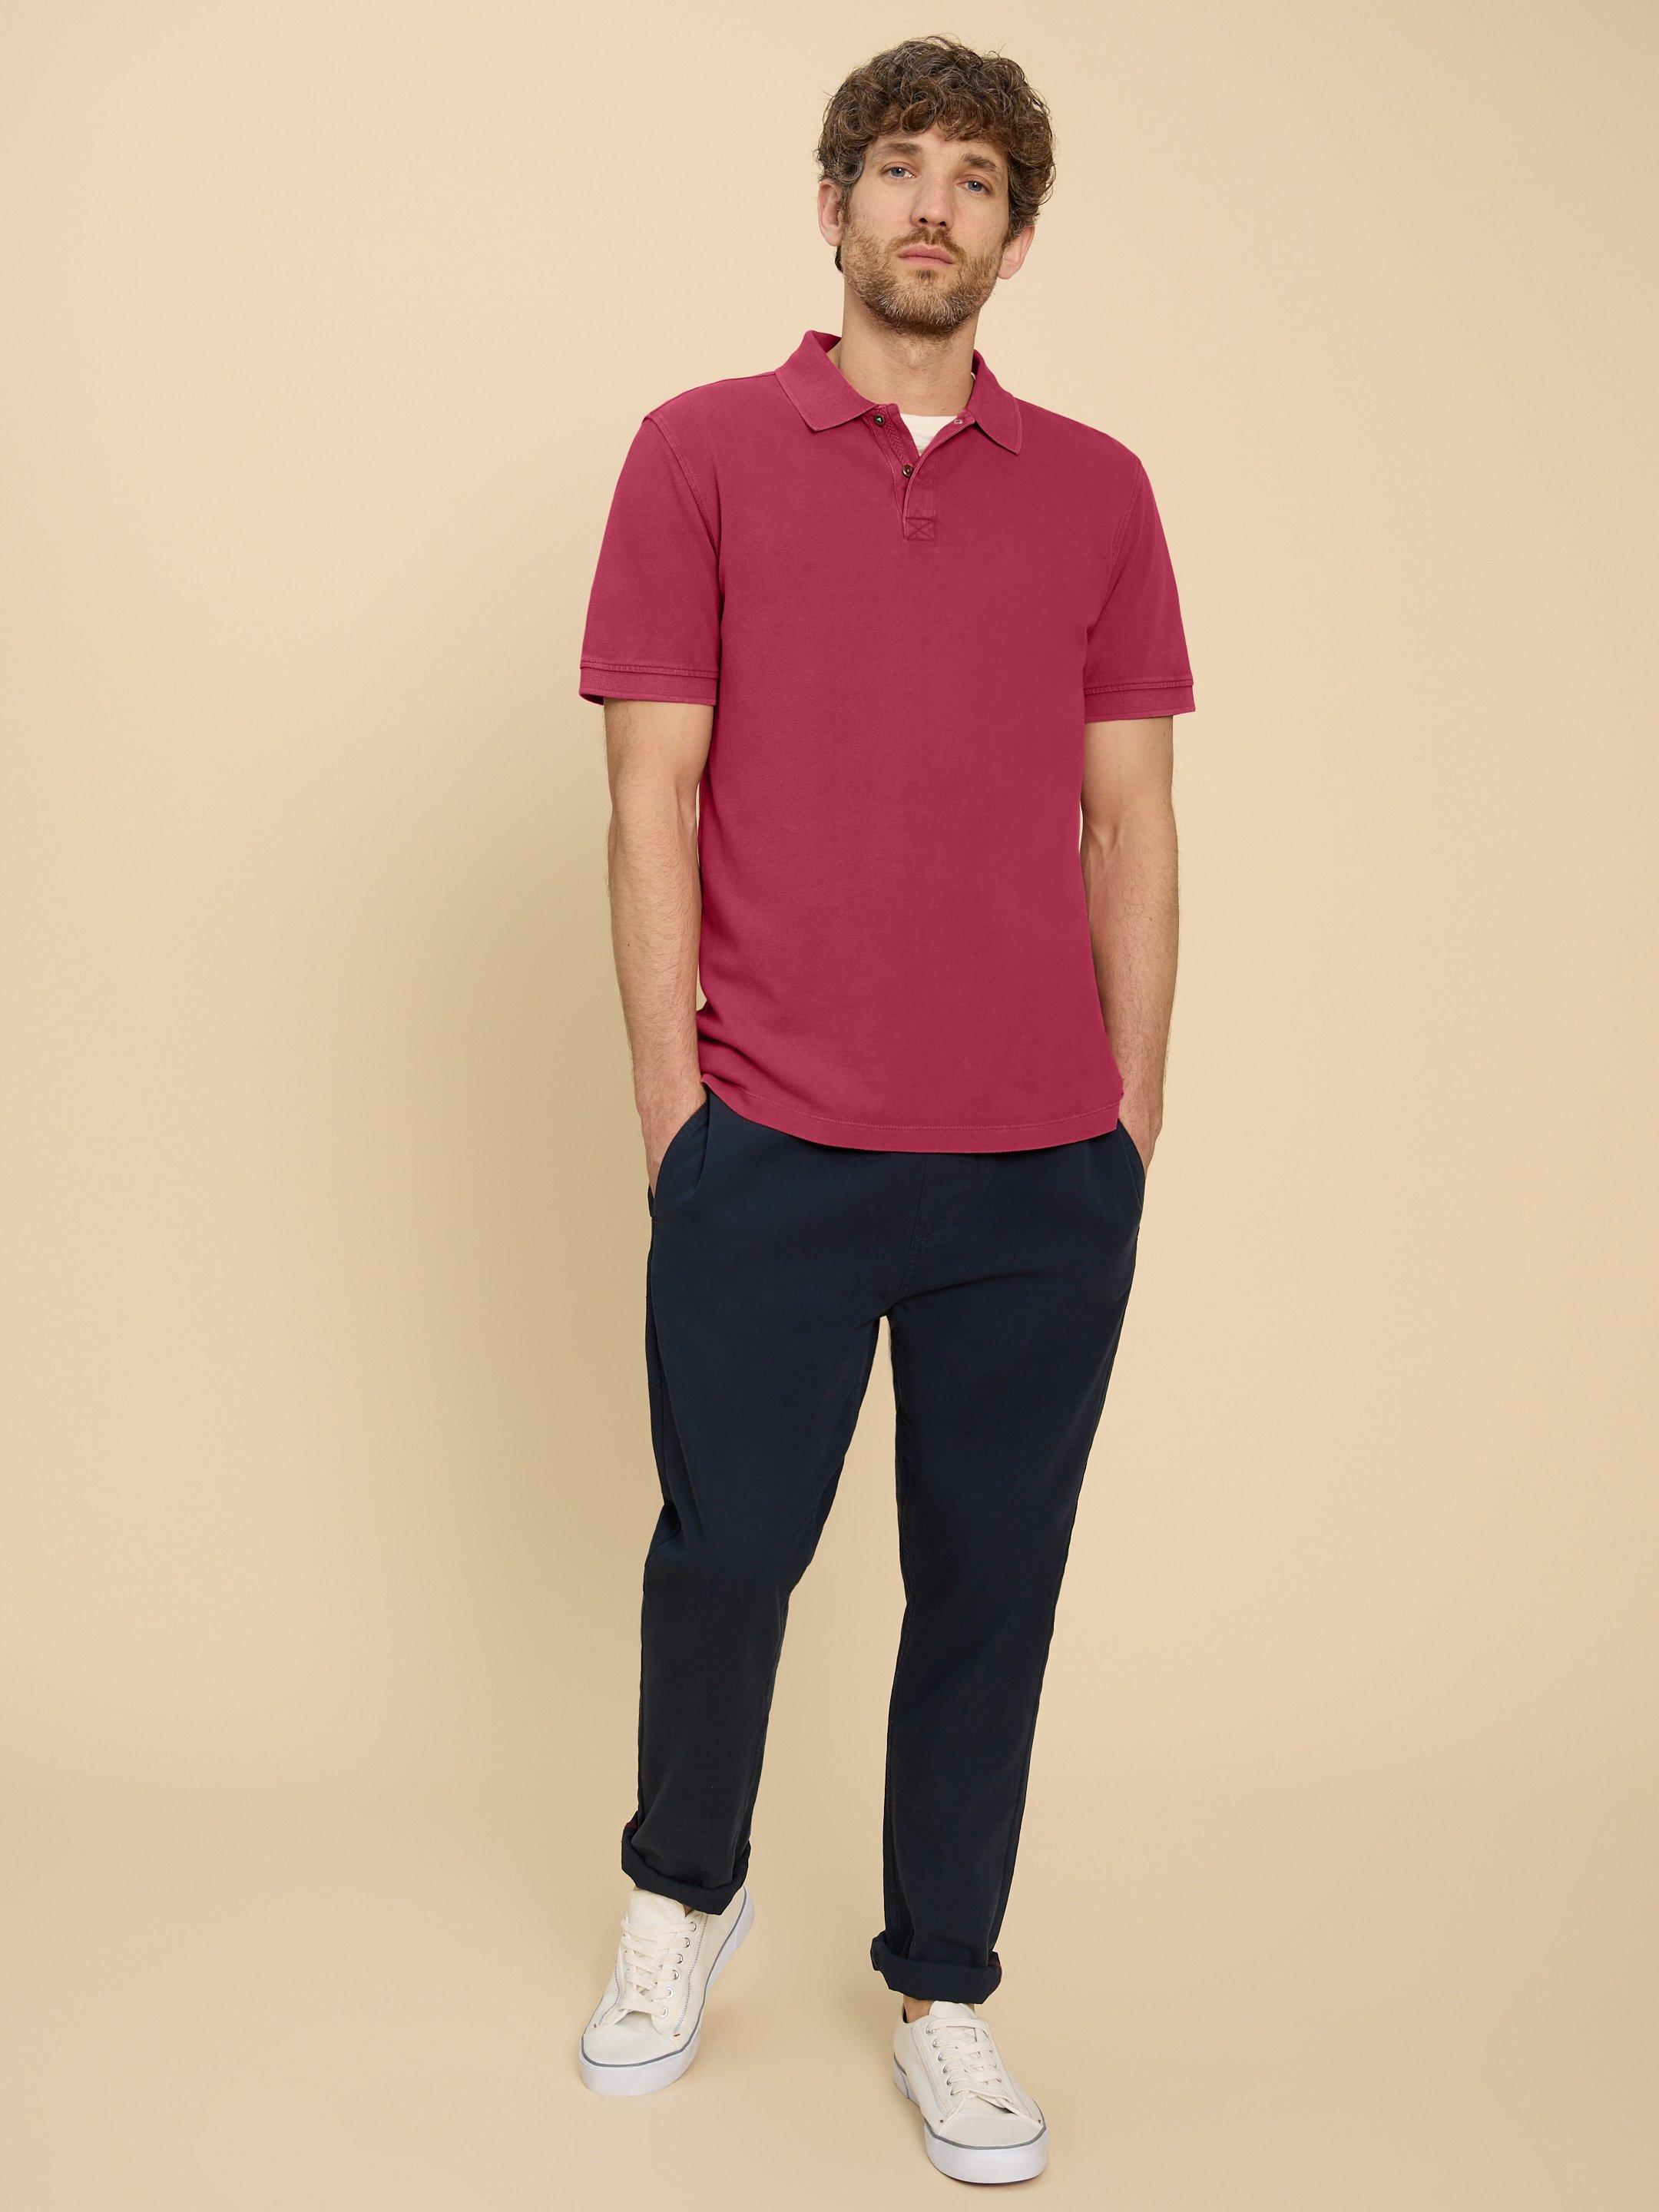 Utility Polo in DEEP PINK - MODEL FRONT